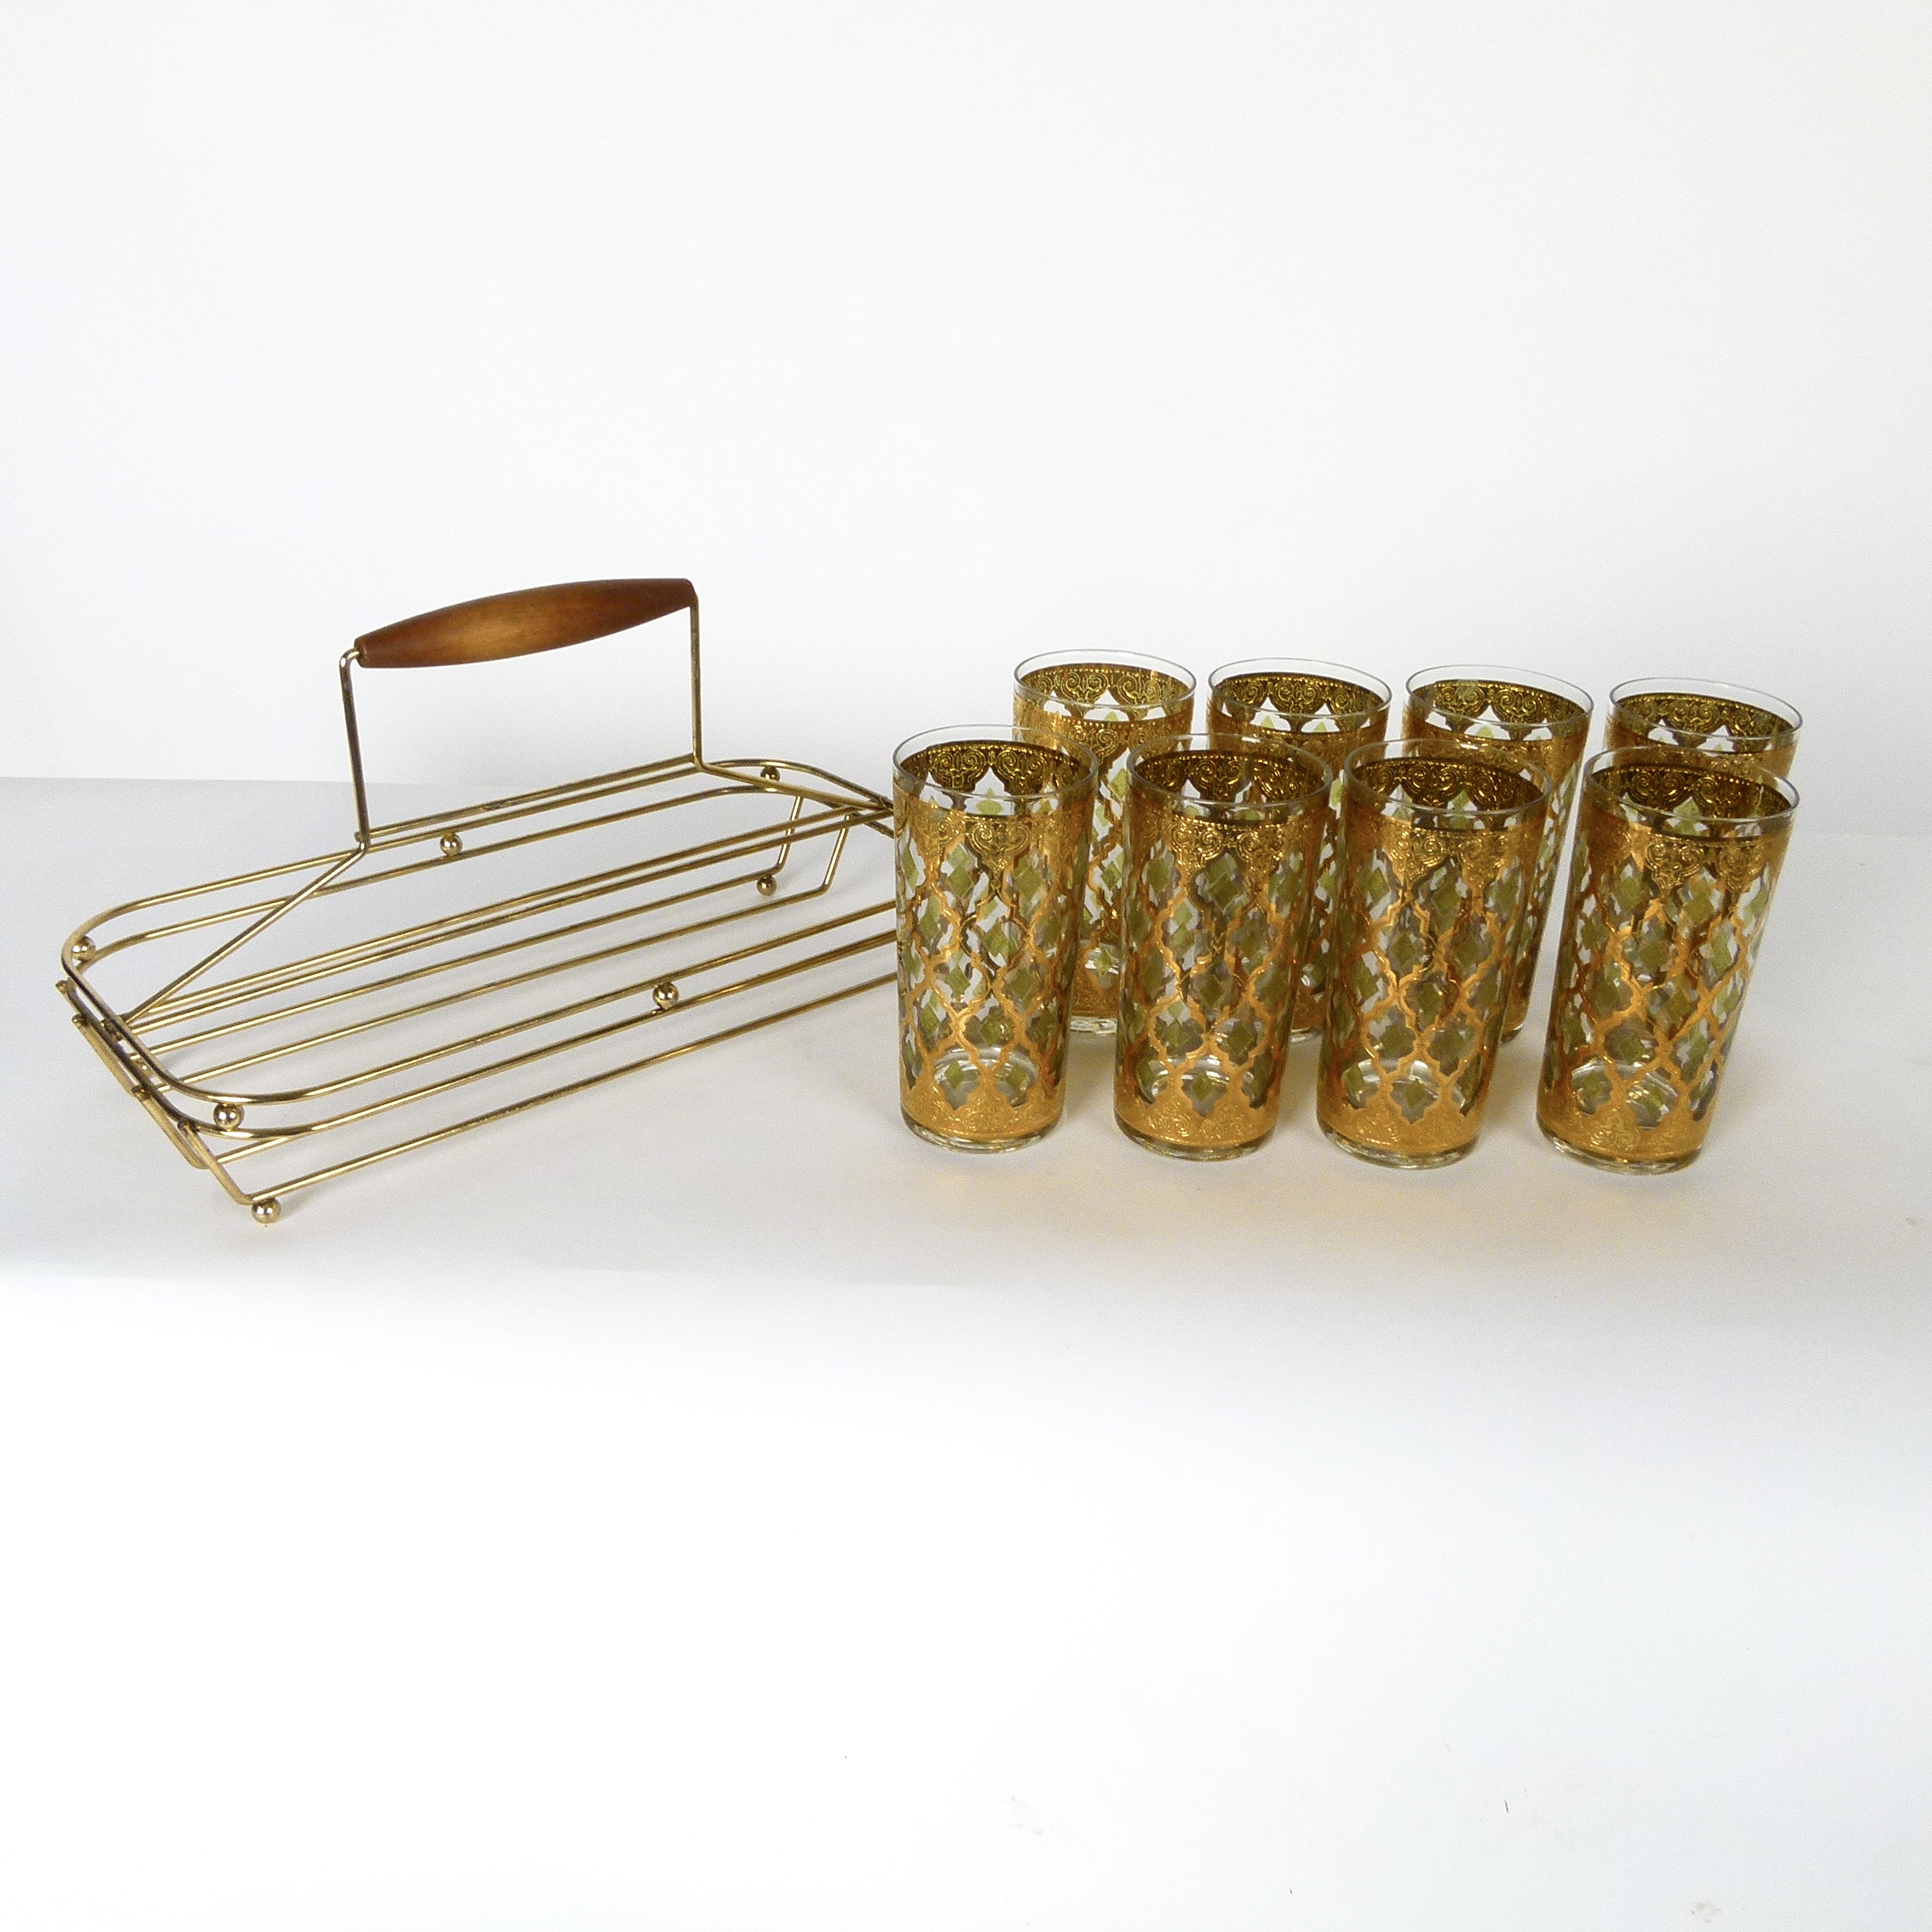 https://cityissue.com/media/pages/shop/objects-and-rugs/culver-valencia-highball-glasses-in-caddy/e9e40d7ba8-1623011908/valencia-glasses.jpg